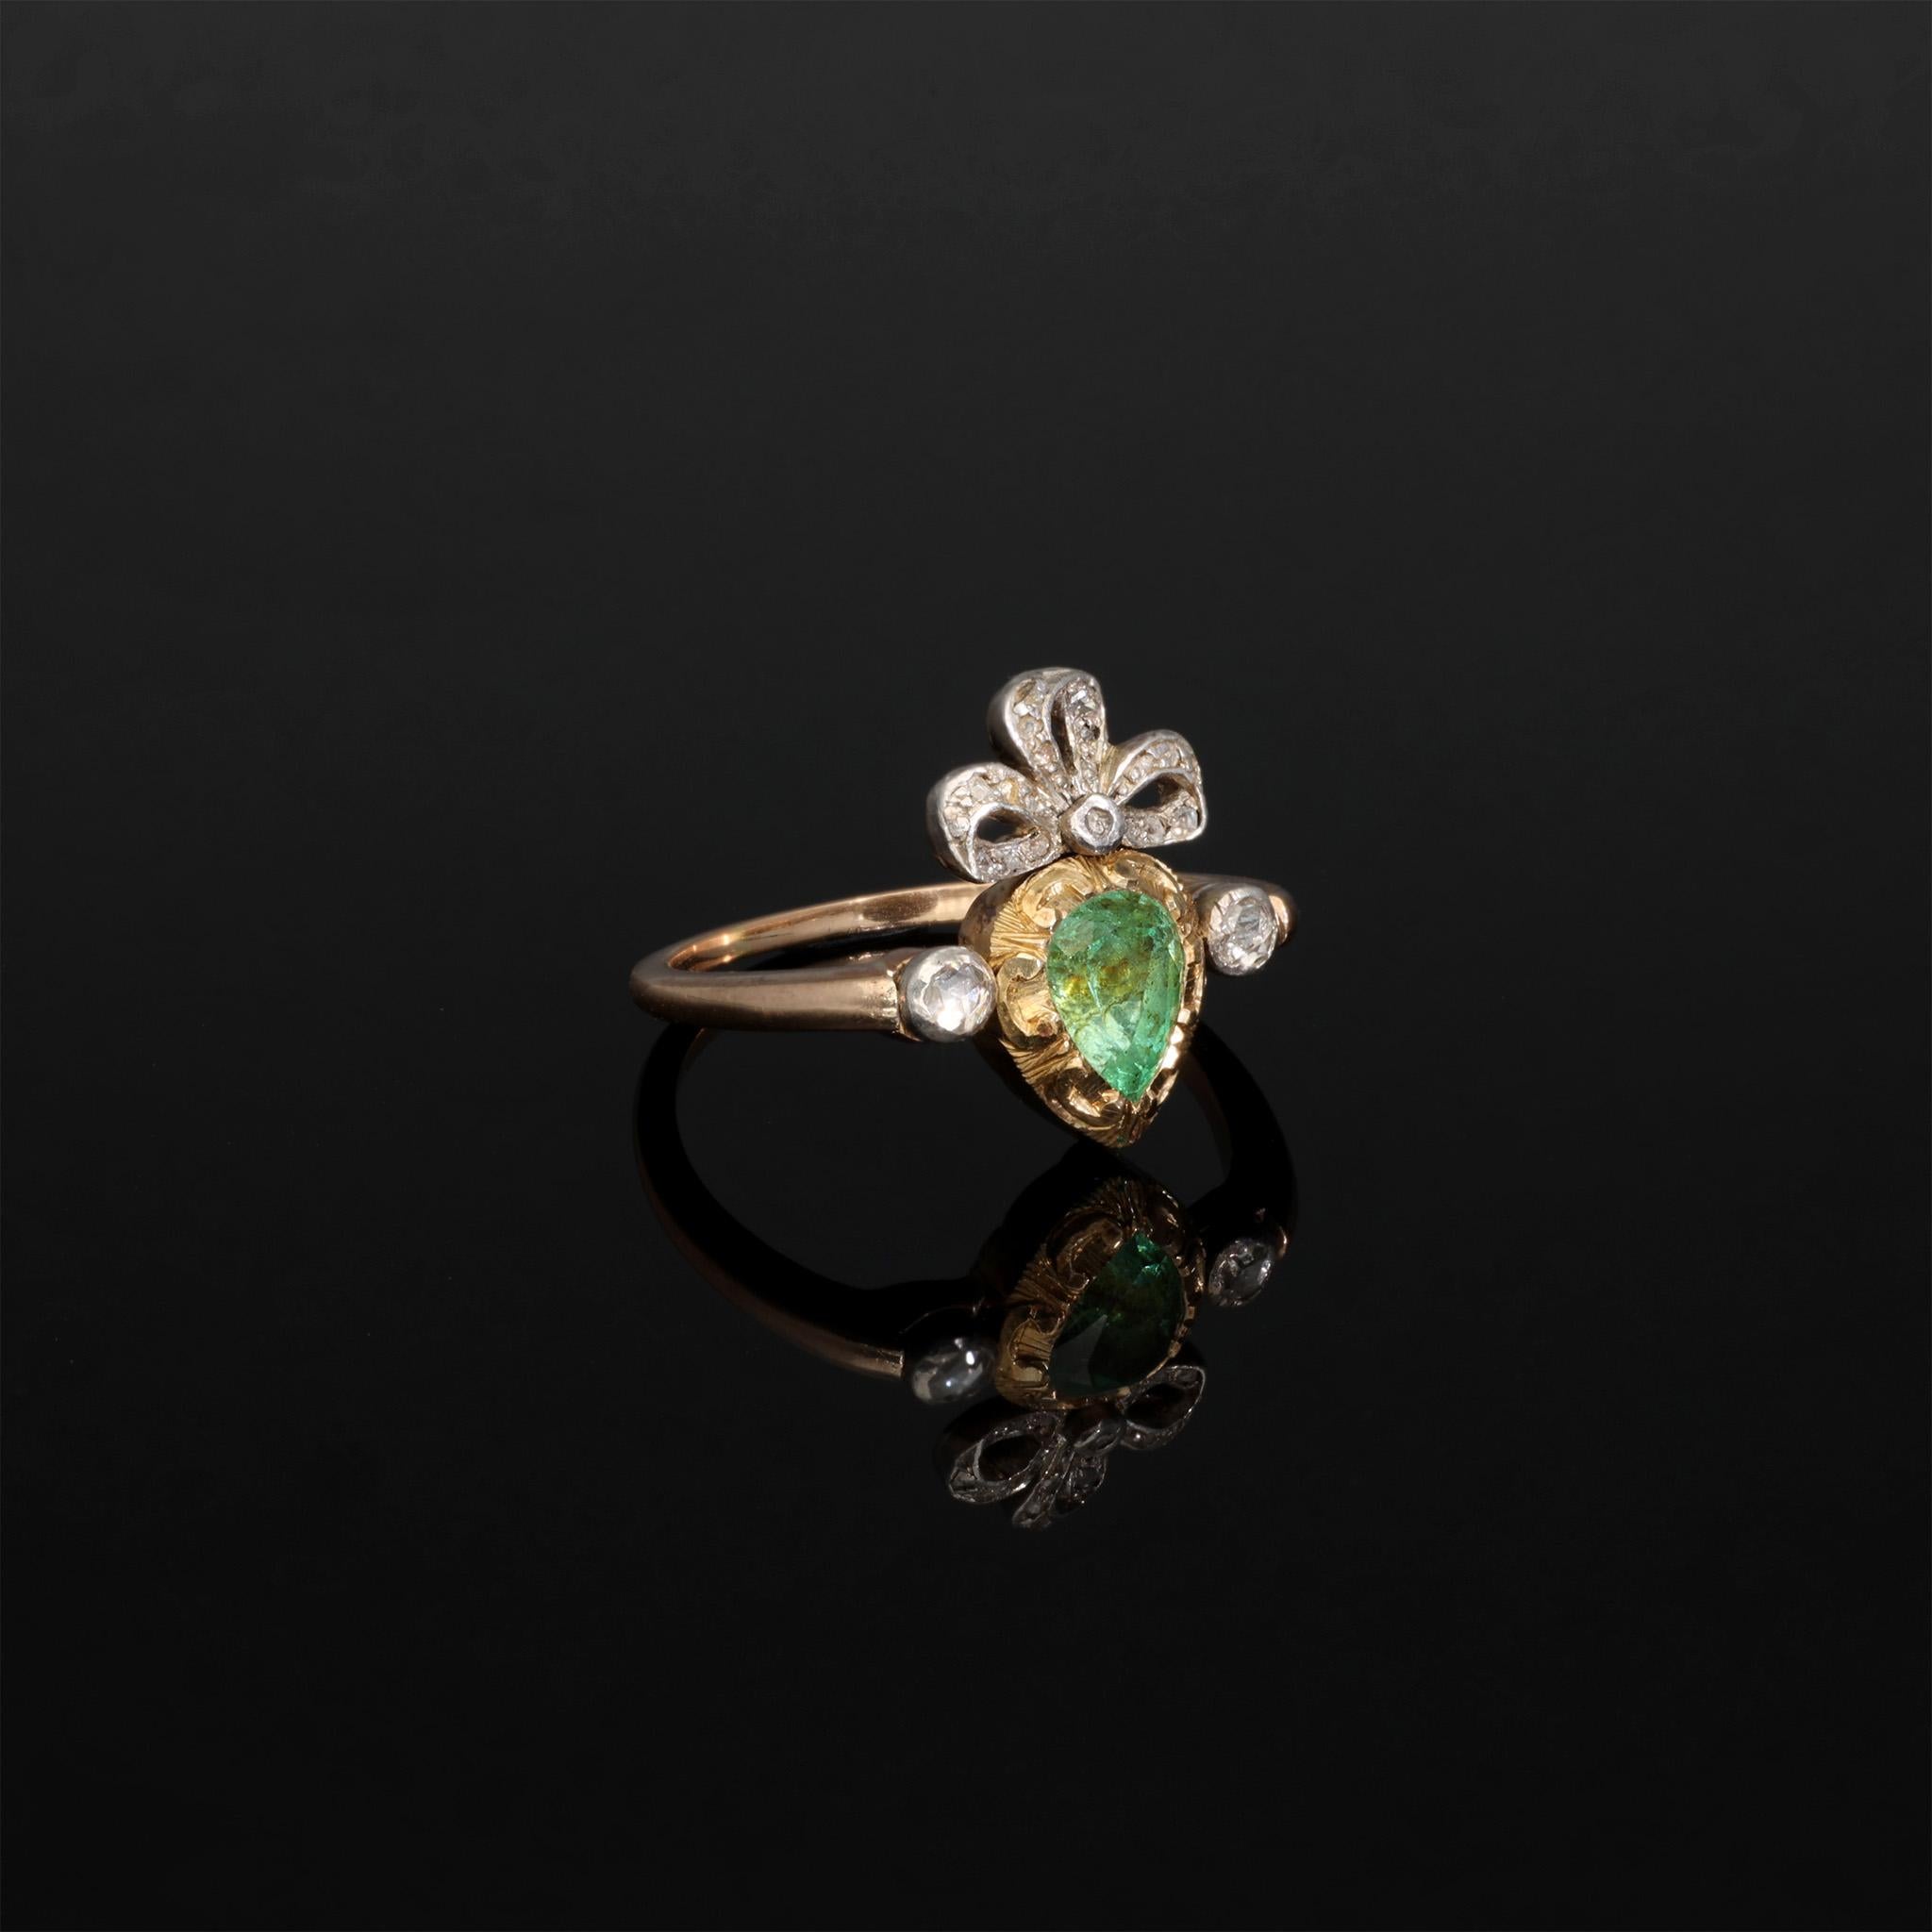 Georgian Vintage Crowned Flaming Heart Engagement Ring, Platinum 0.4 CT Emerald Gold Ring For Sale